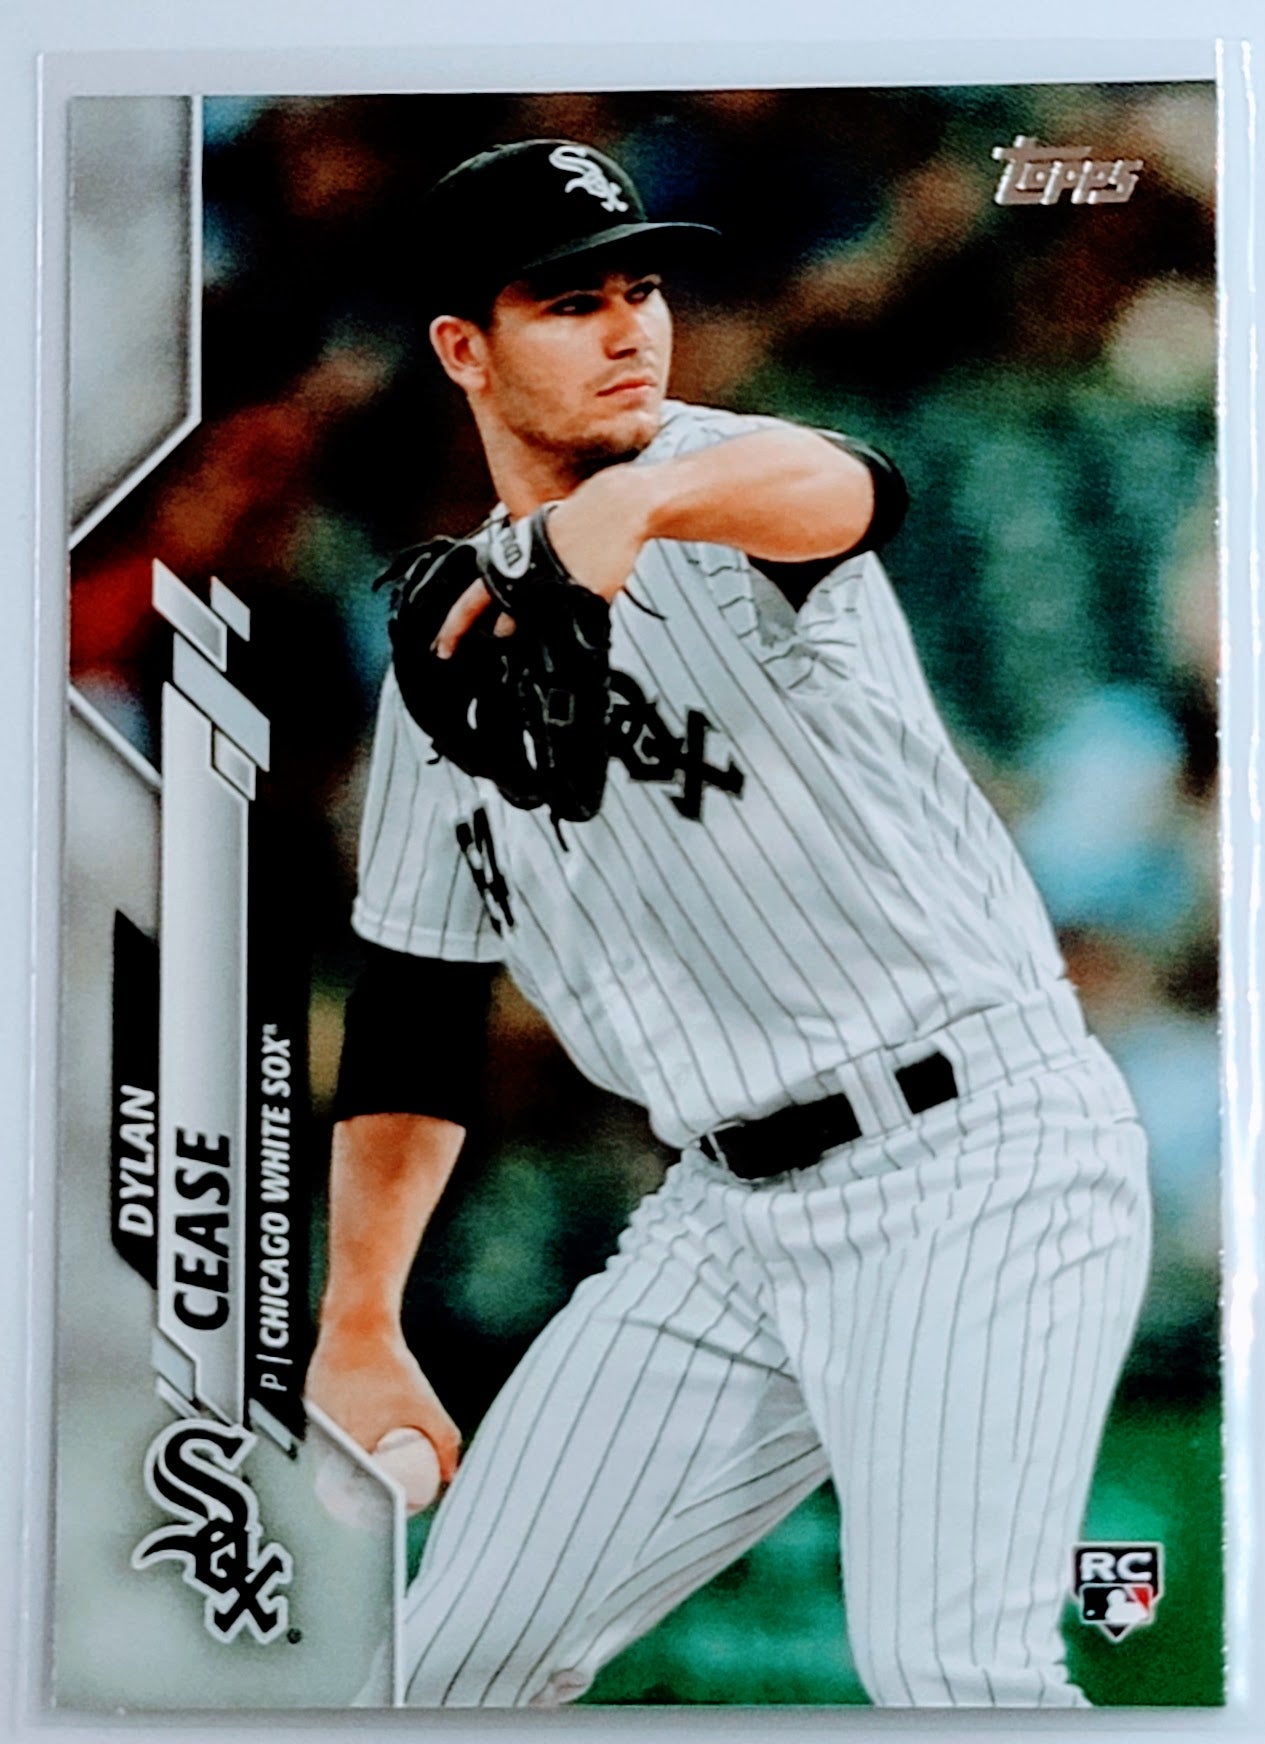 2020 Topps Dylan Cease   RC Baseball Card  TH13C simple Xclusive Collectibles   